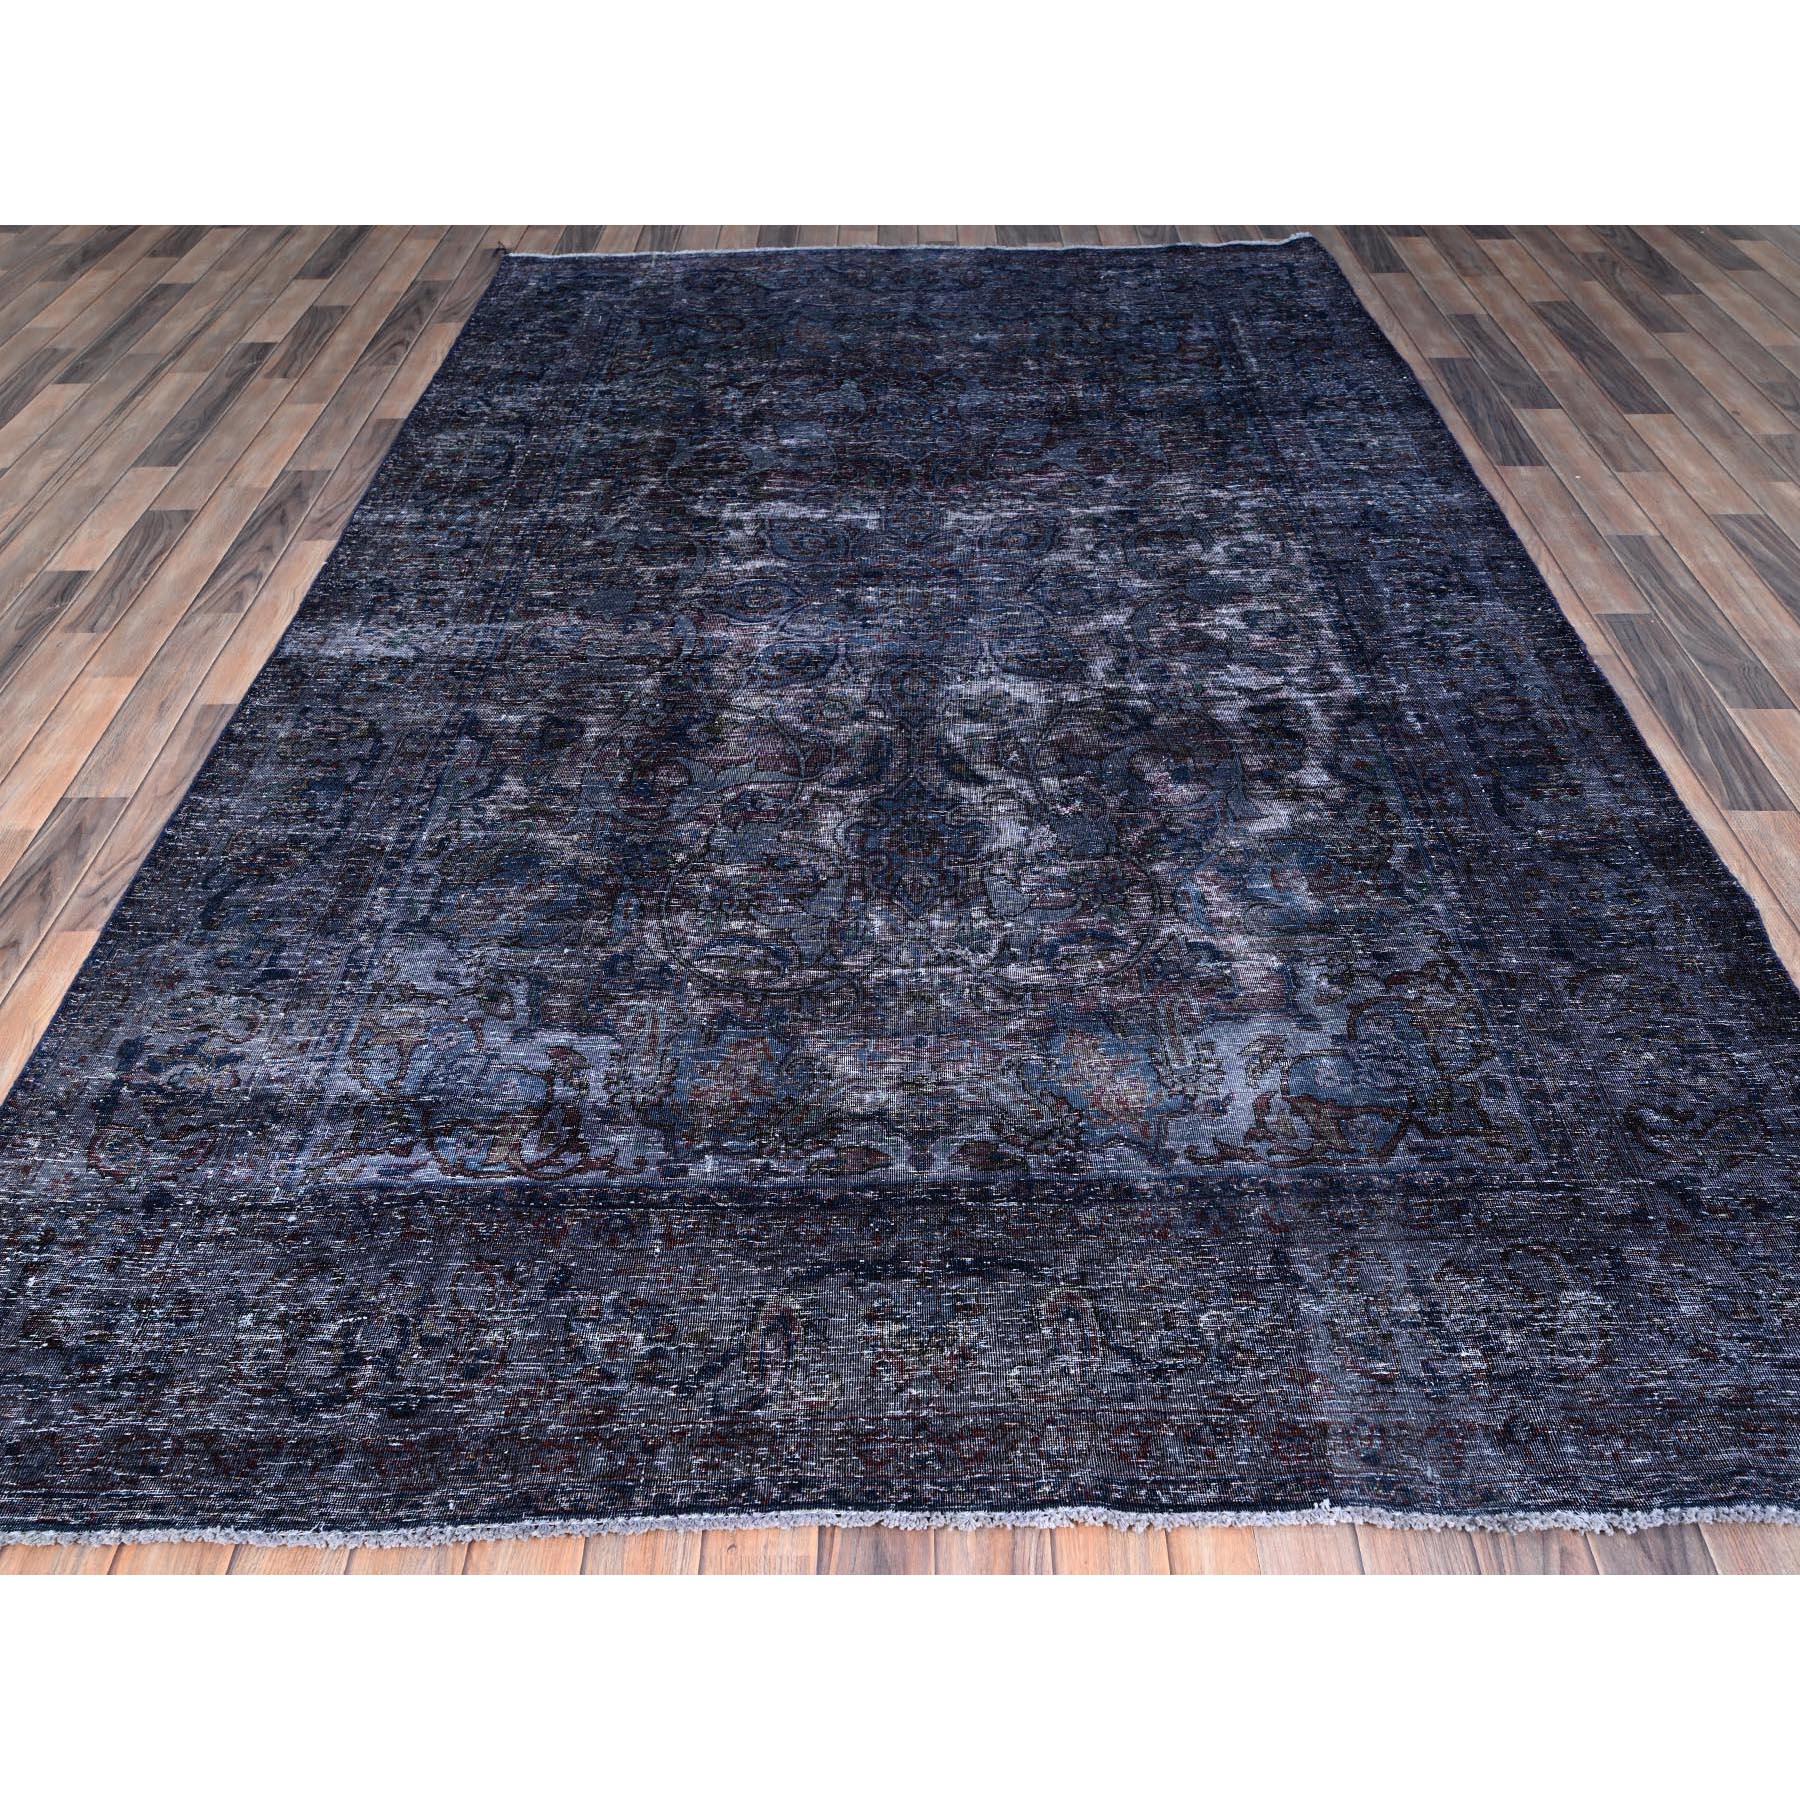 Persian Denim Blue Overdyed Vintage Tabriz Pure Wool Sheared Low Clean Hand Knotted Rug For Sale